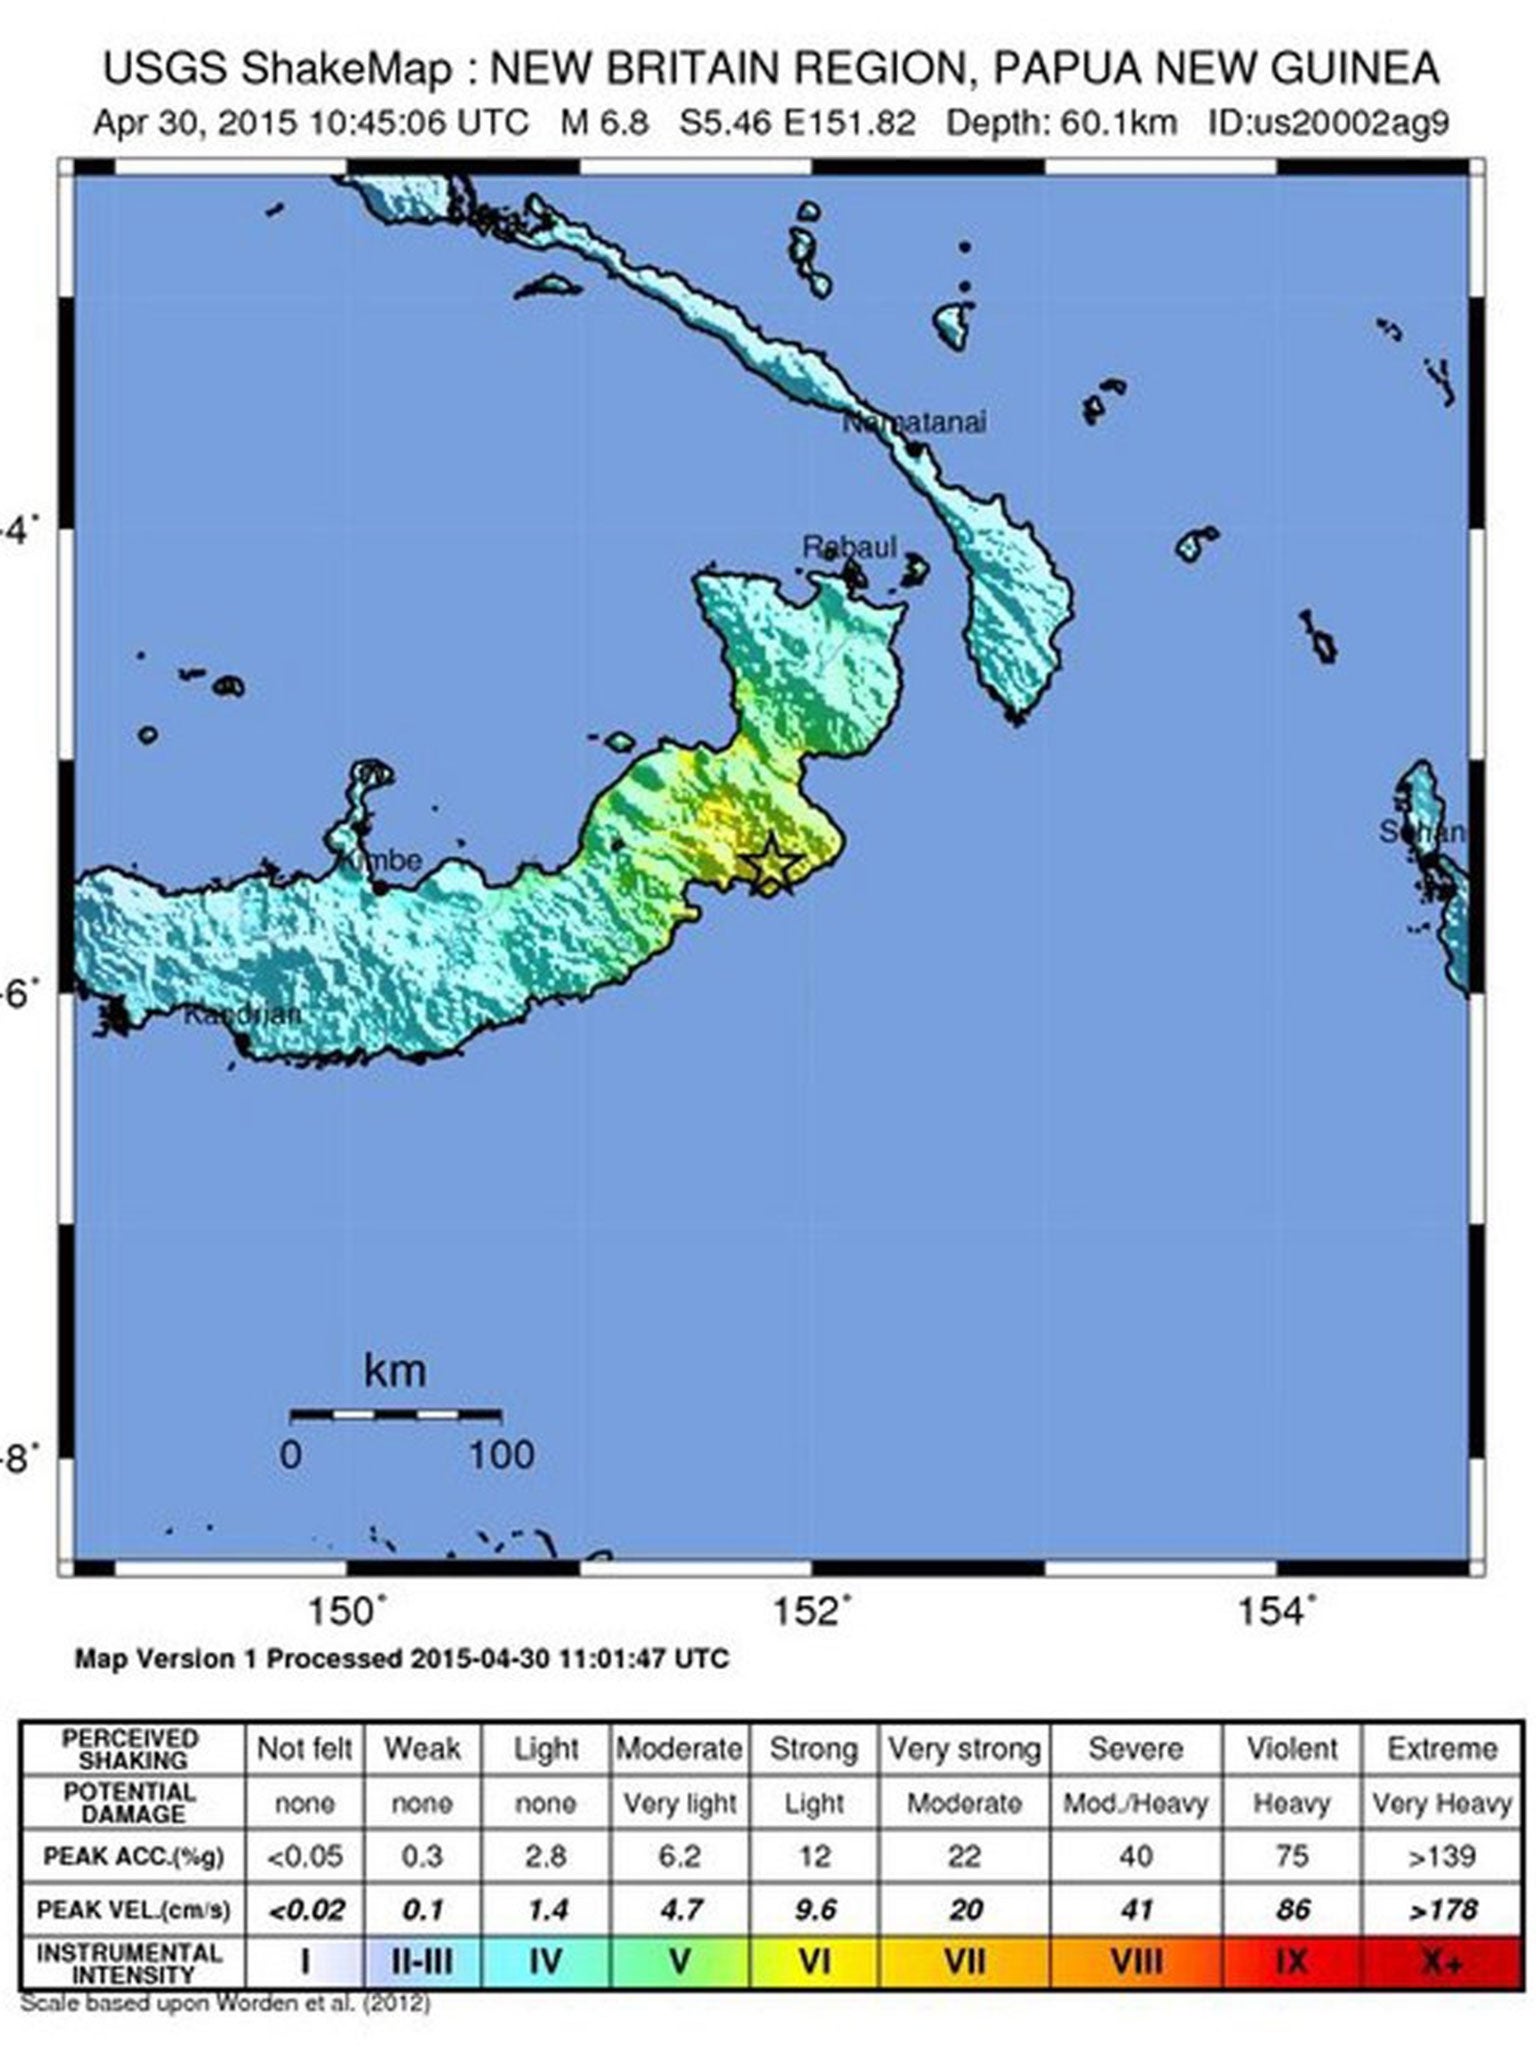 A tsunami warning was issued along the coast within 300km of the quake’s epicentre but has since been lifted